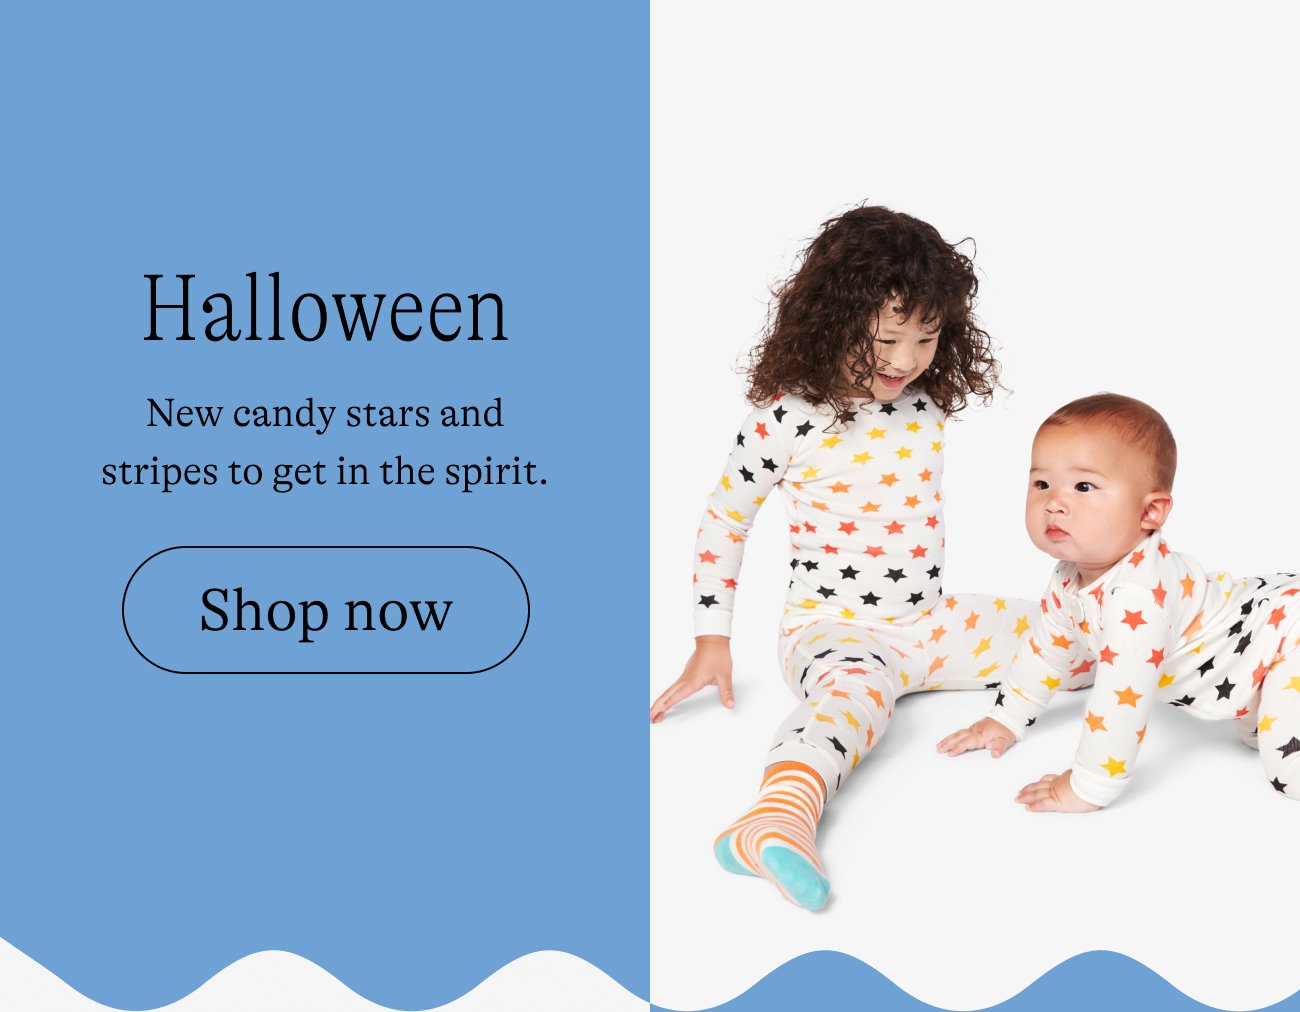 Halloween: New candy stars and stripes to get in the spirit. Shop now.